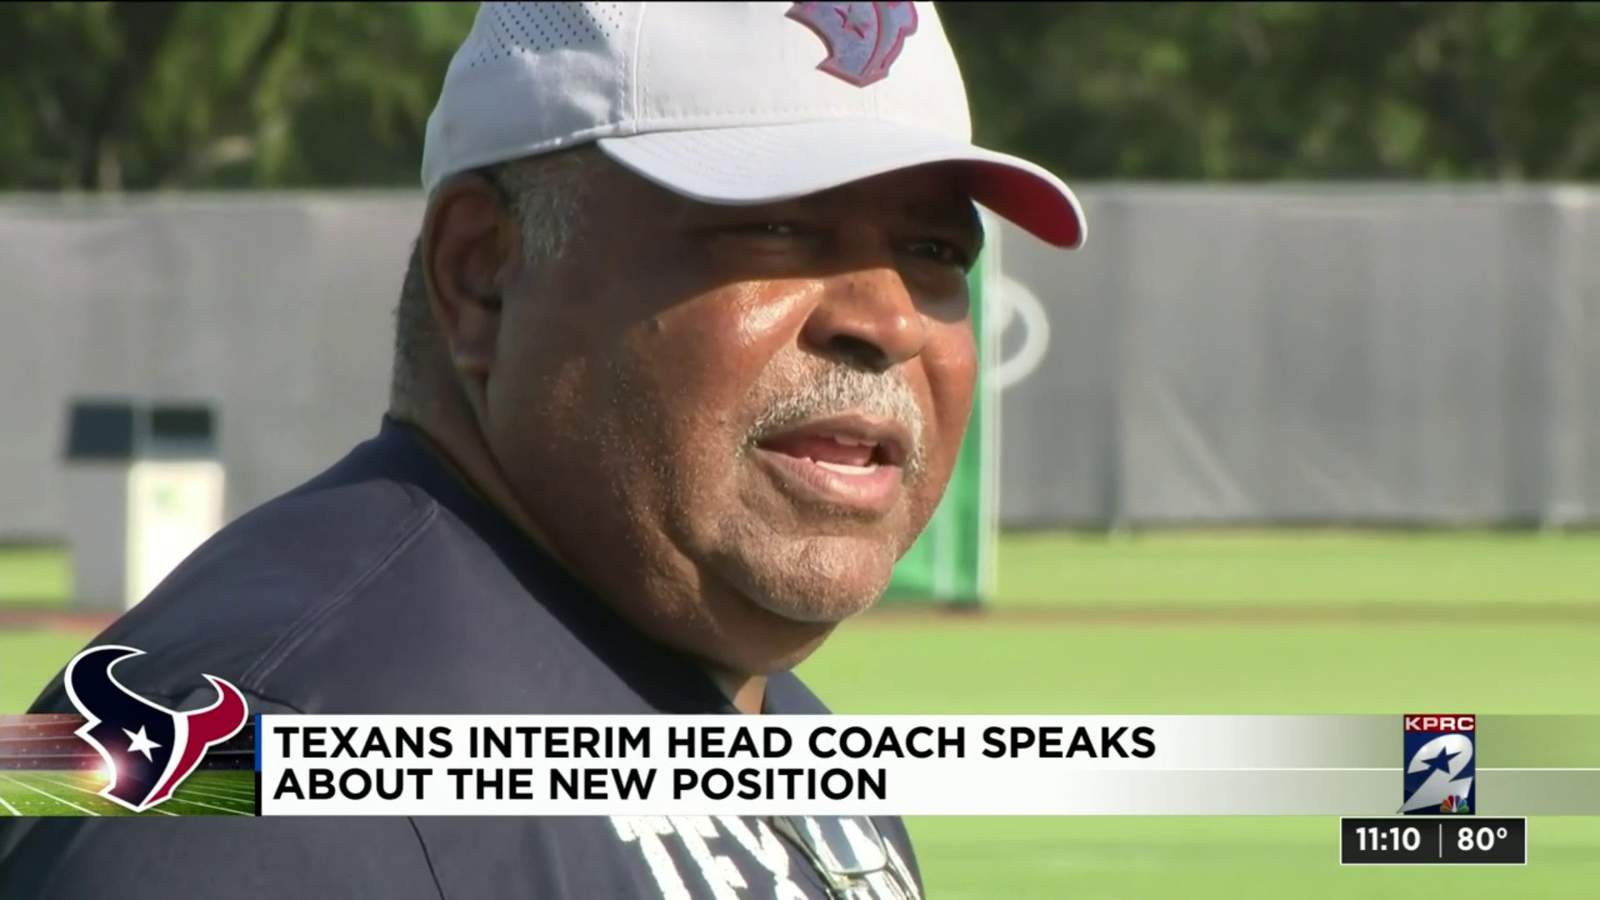 Interim Texans head coach Romeo Crennel says he just want to make the team better